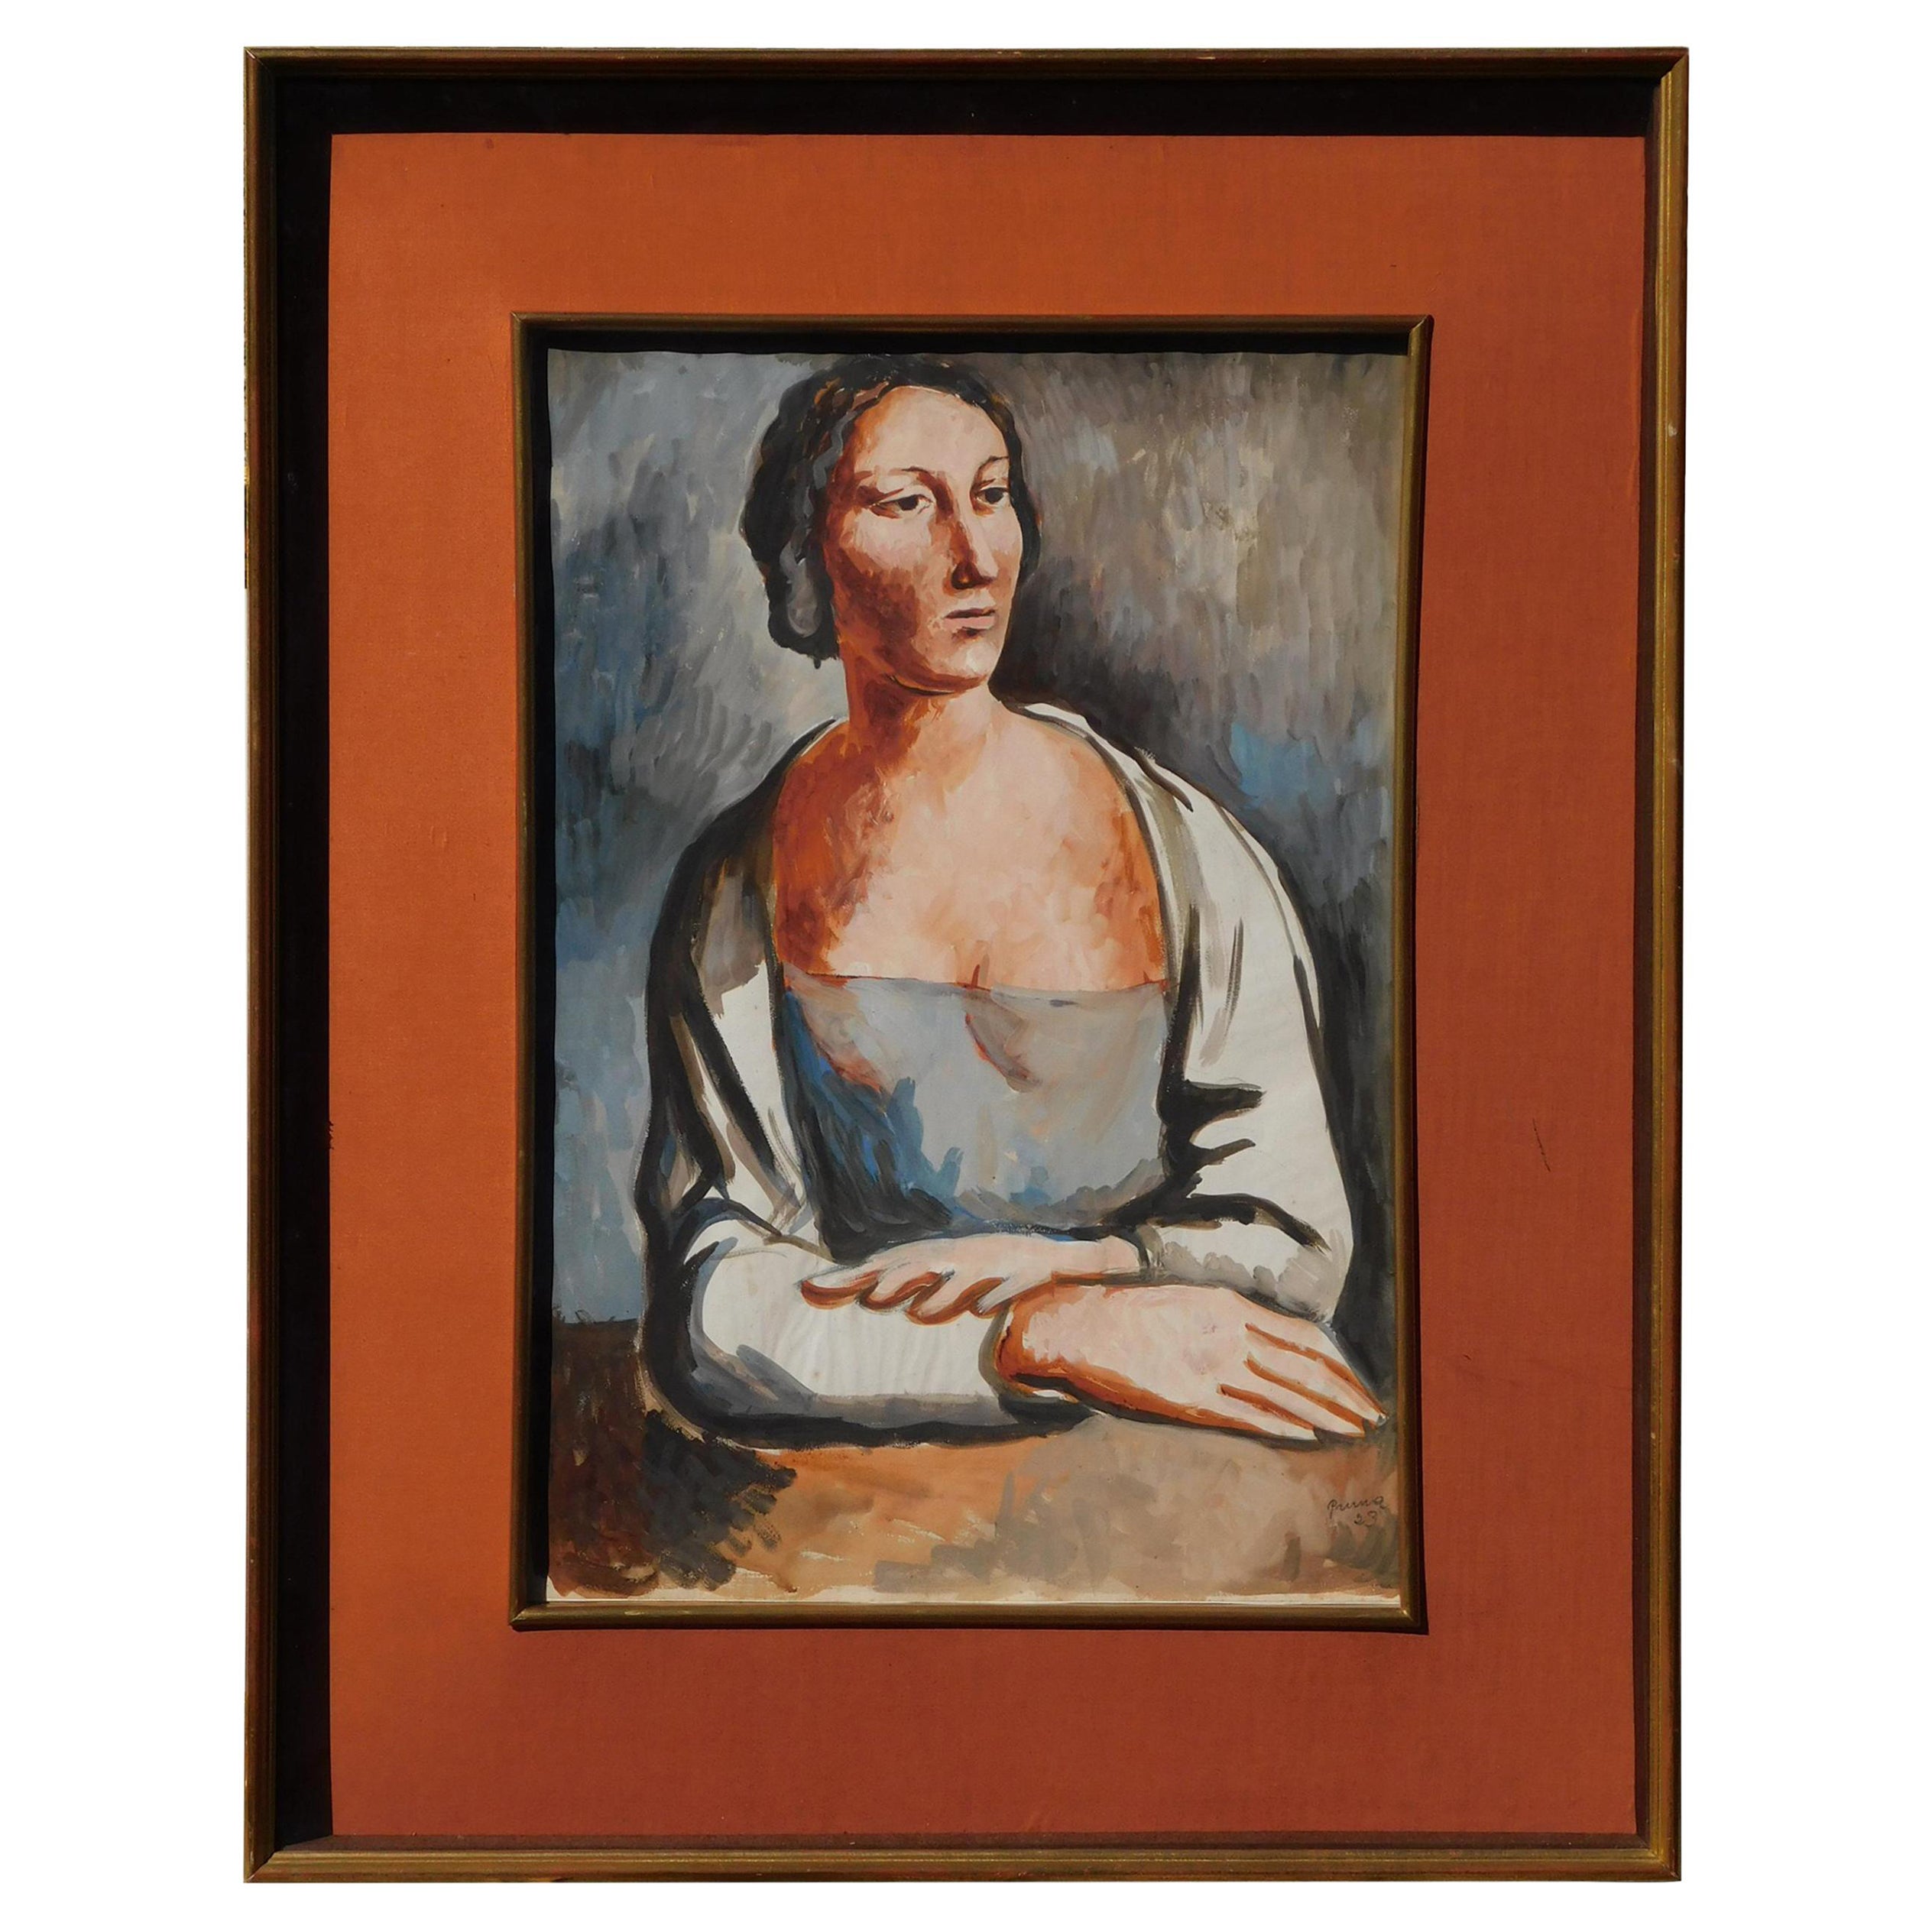 Gouache by Spanish Painter Pedro Pruna, 1923 - “Femme Assise”